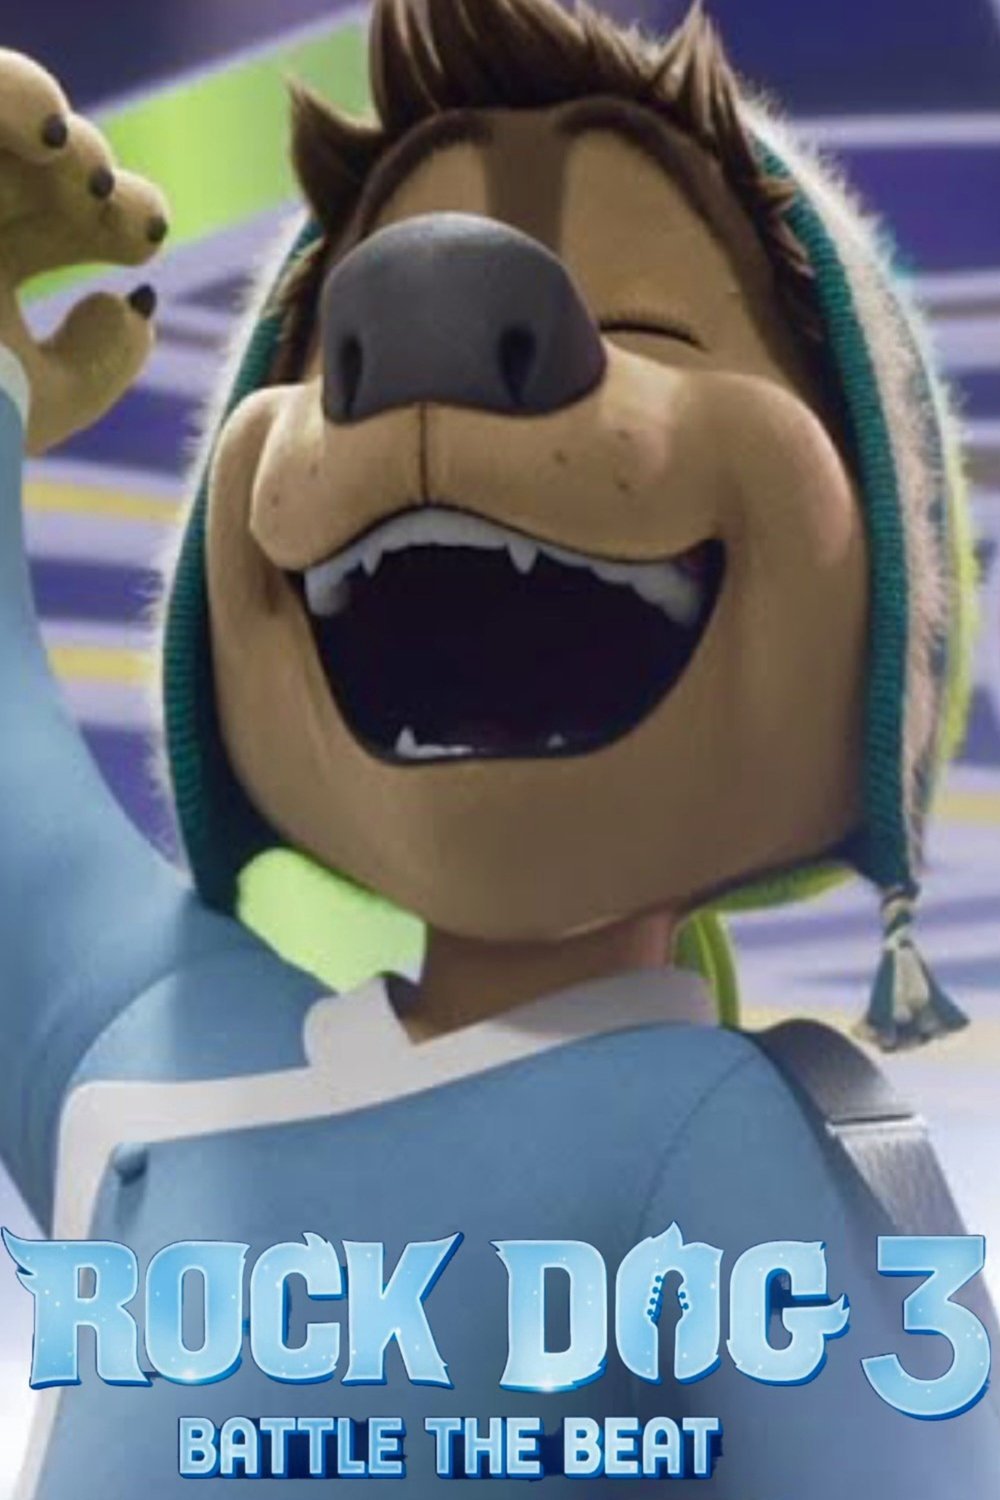 Poster of the movie Rock Dog 3 Battle the Beat